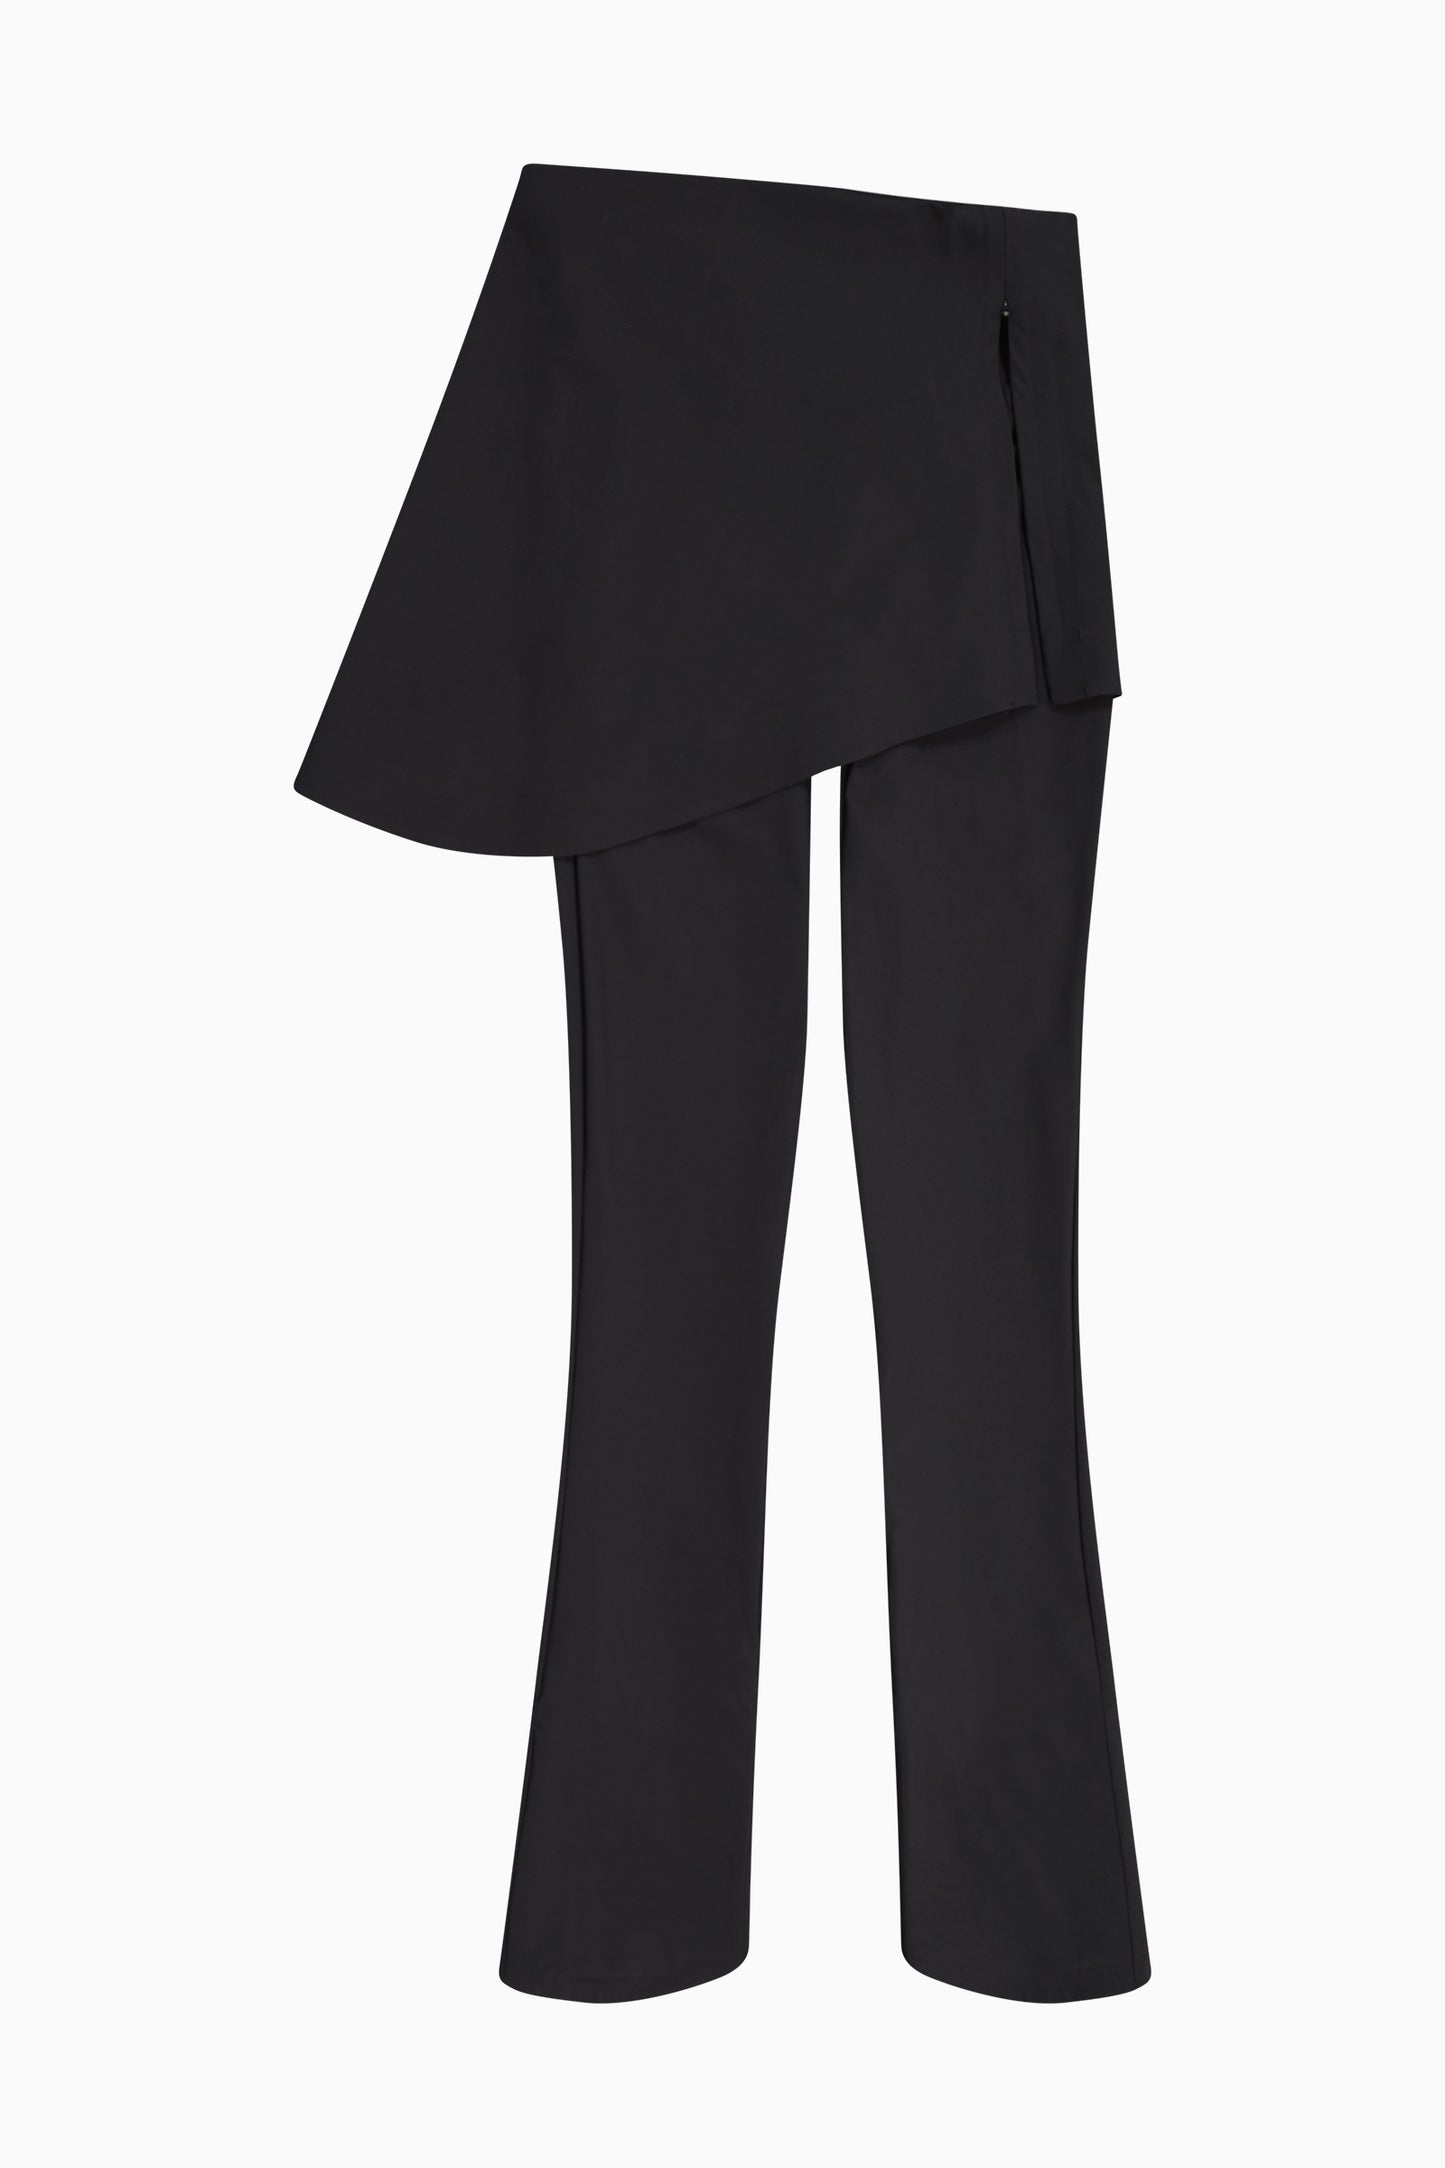 One Piece Skirt Trousers